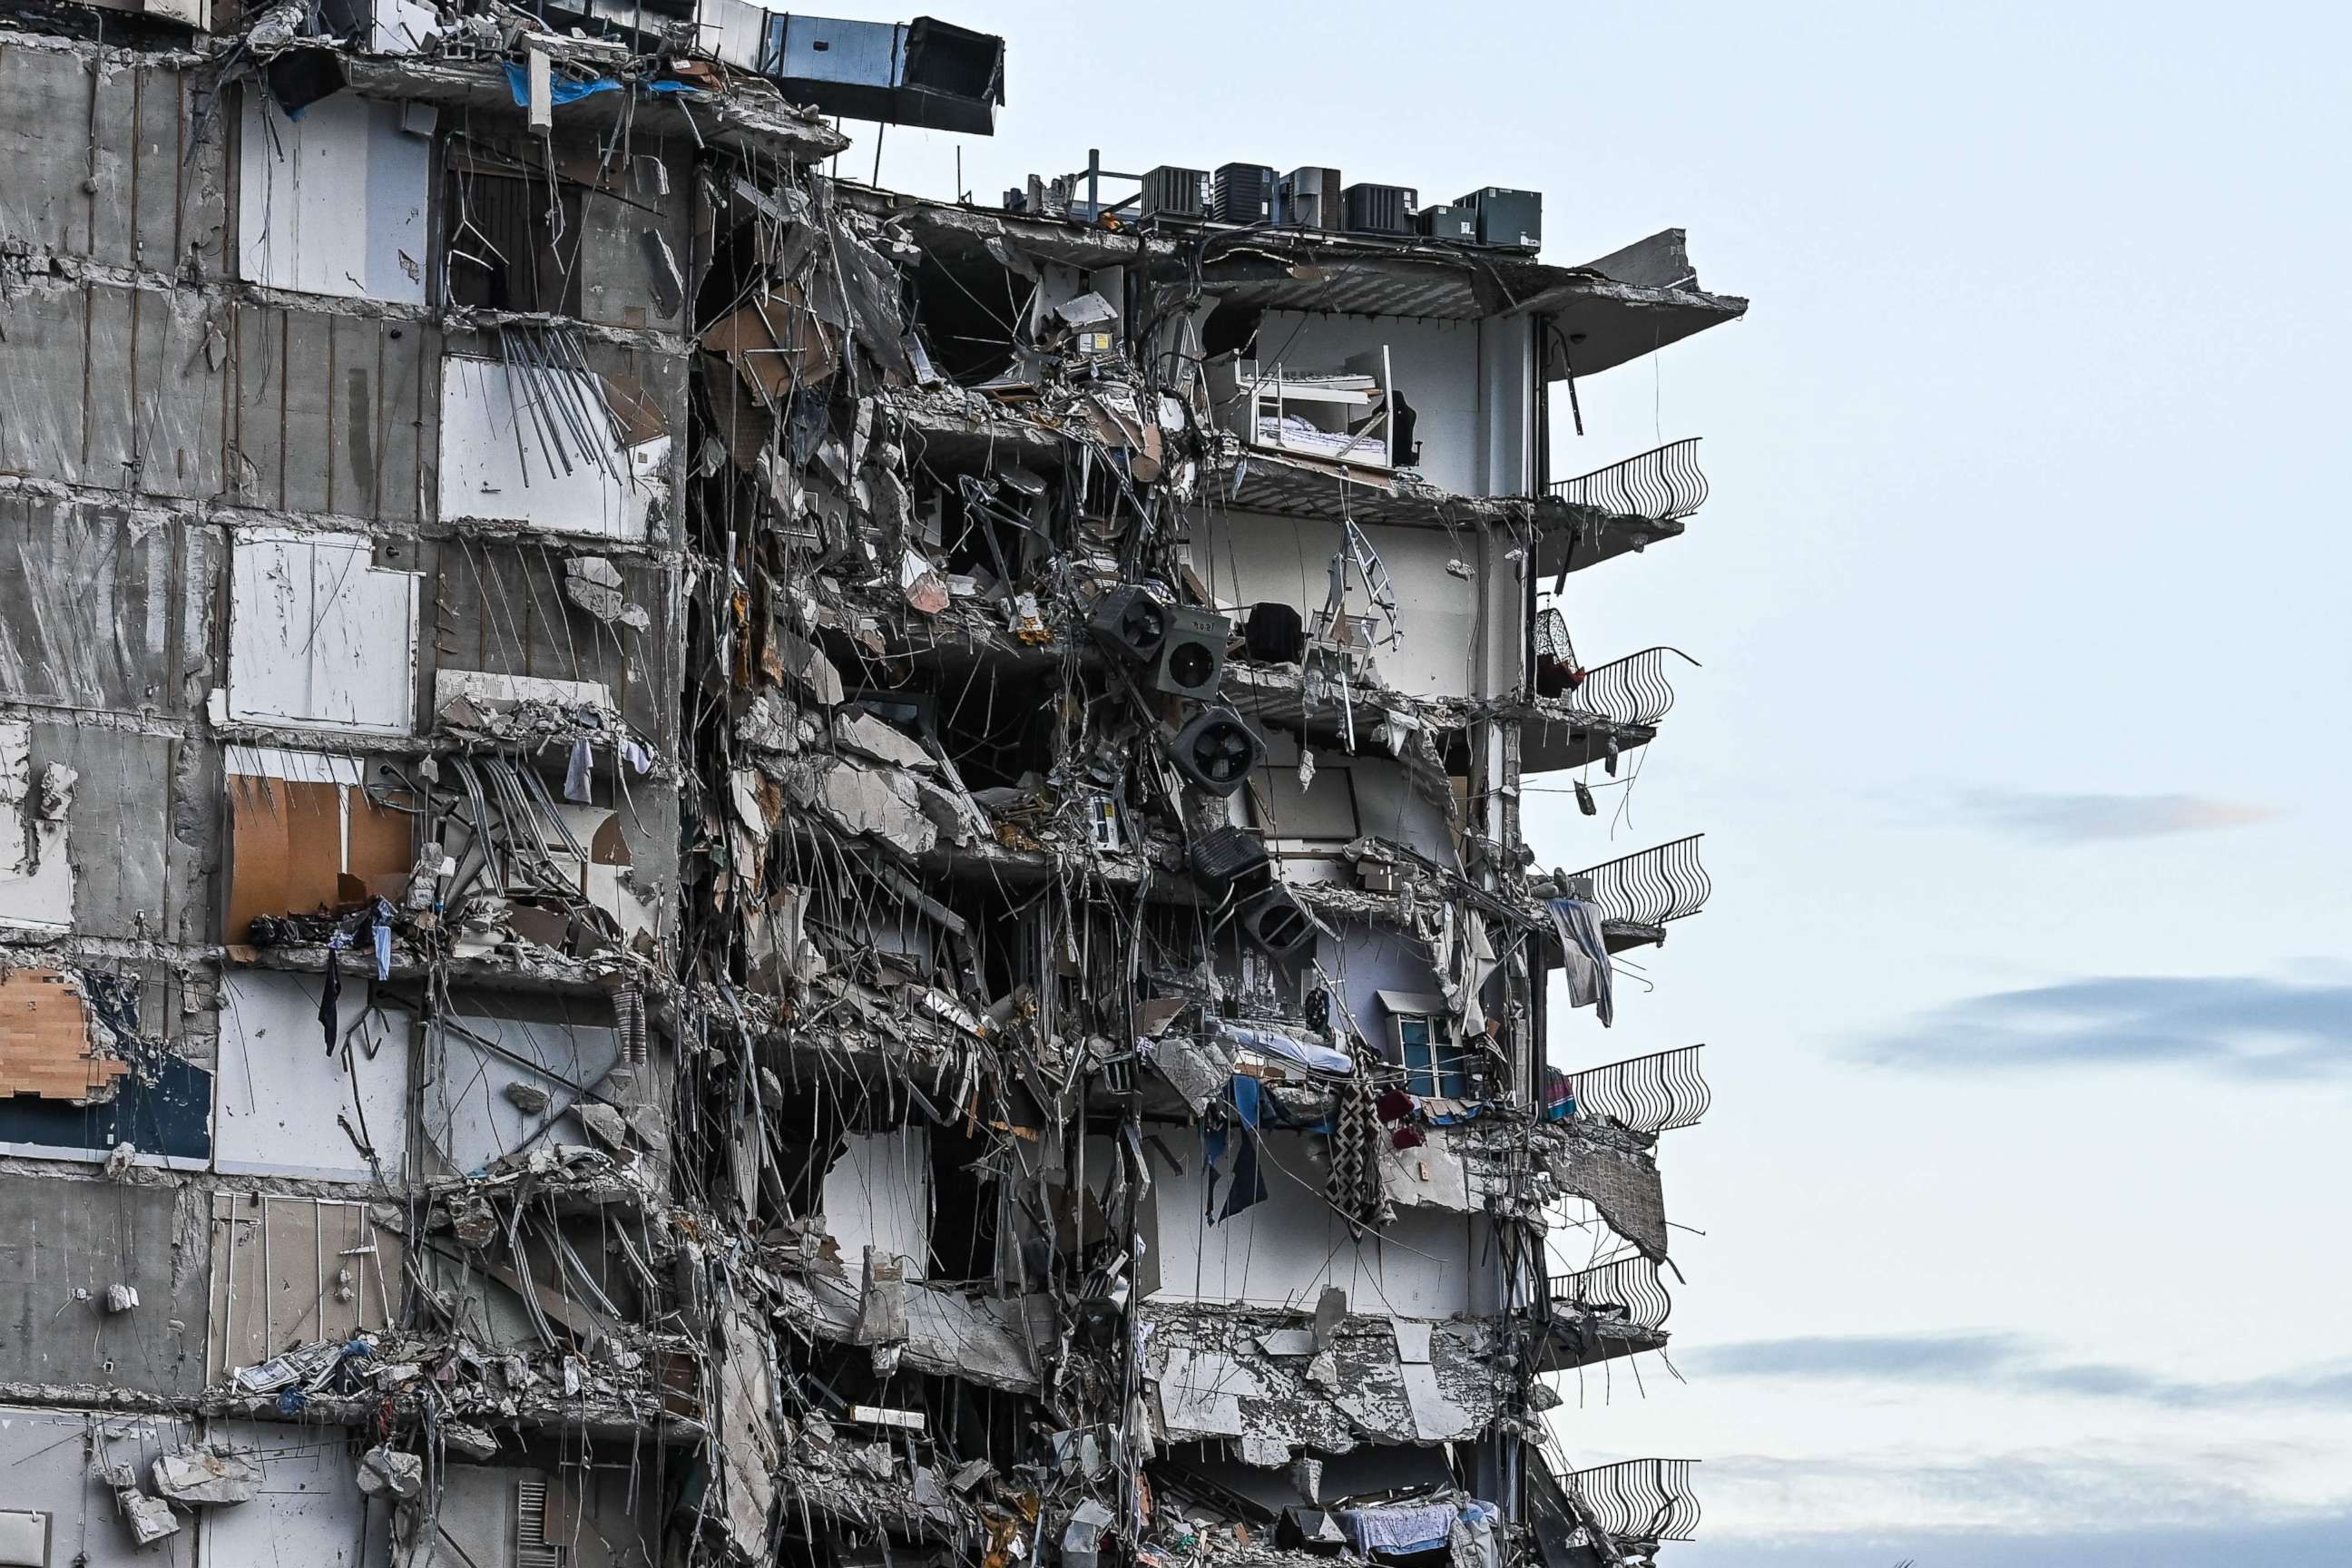 PHOTO: Rubble hangs from a partially collapsed building in Surfside, Fla., north of Miami Beach, on June 24, 2021.